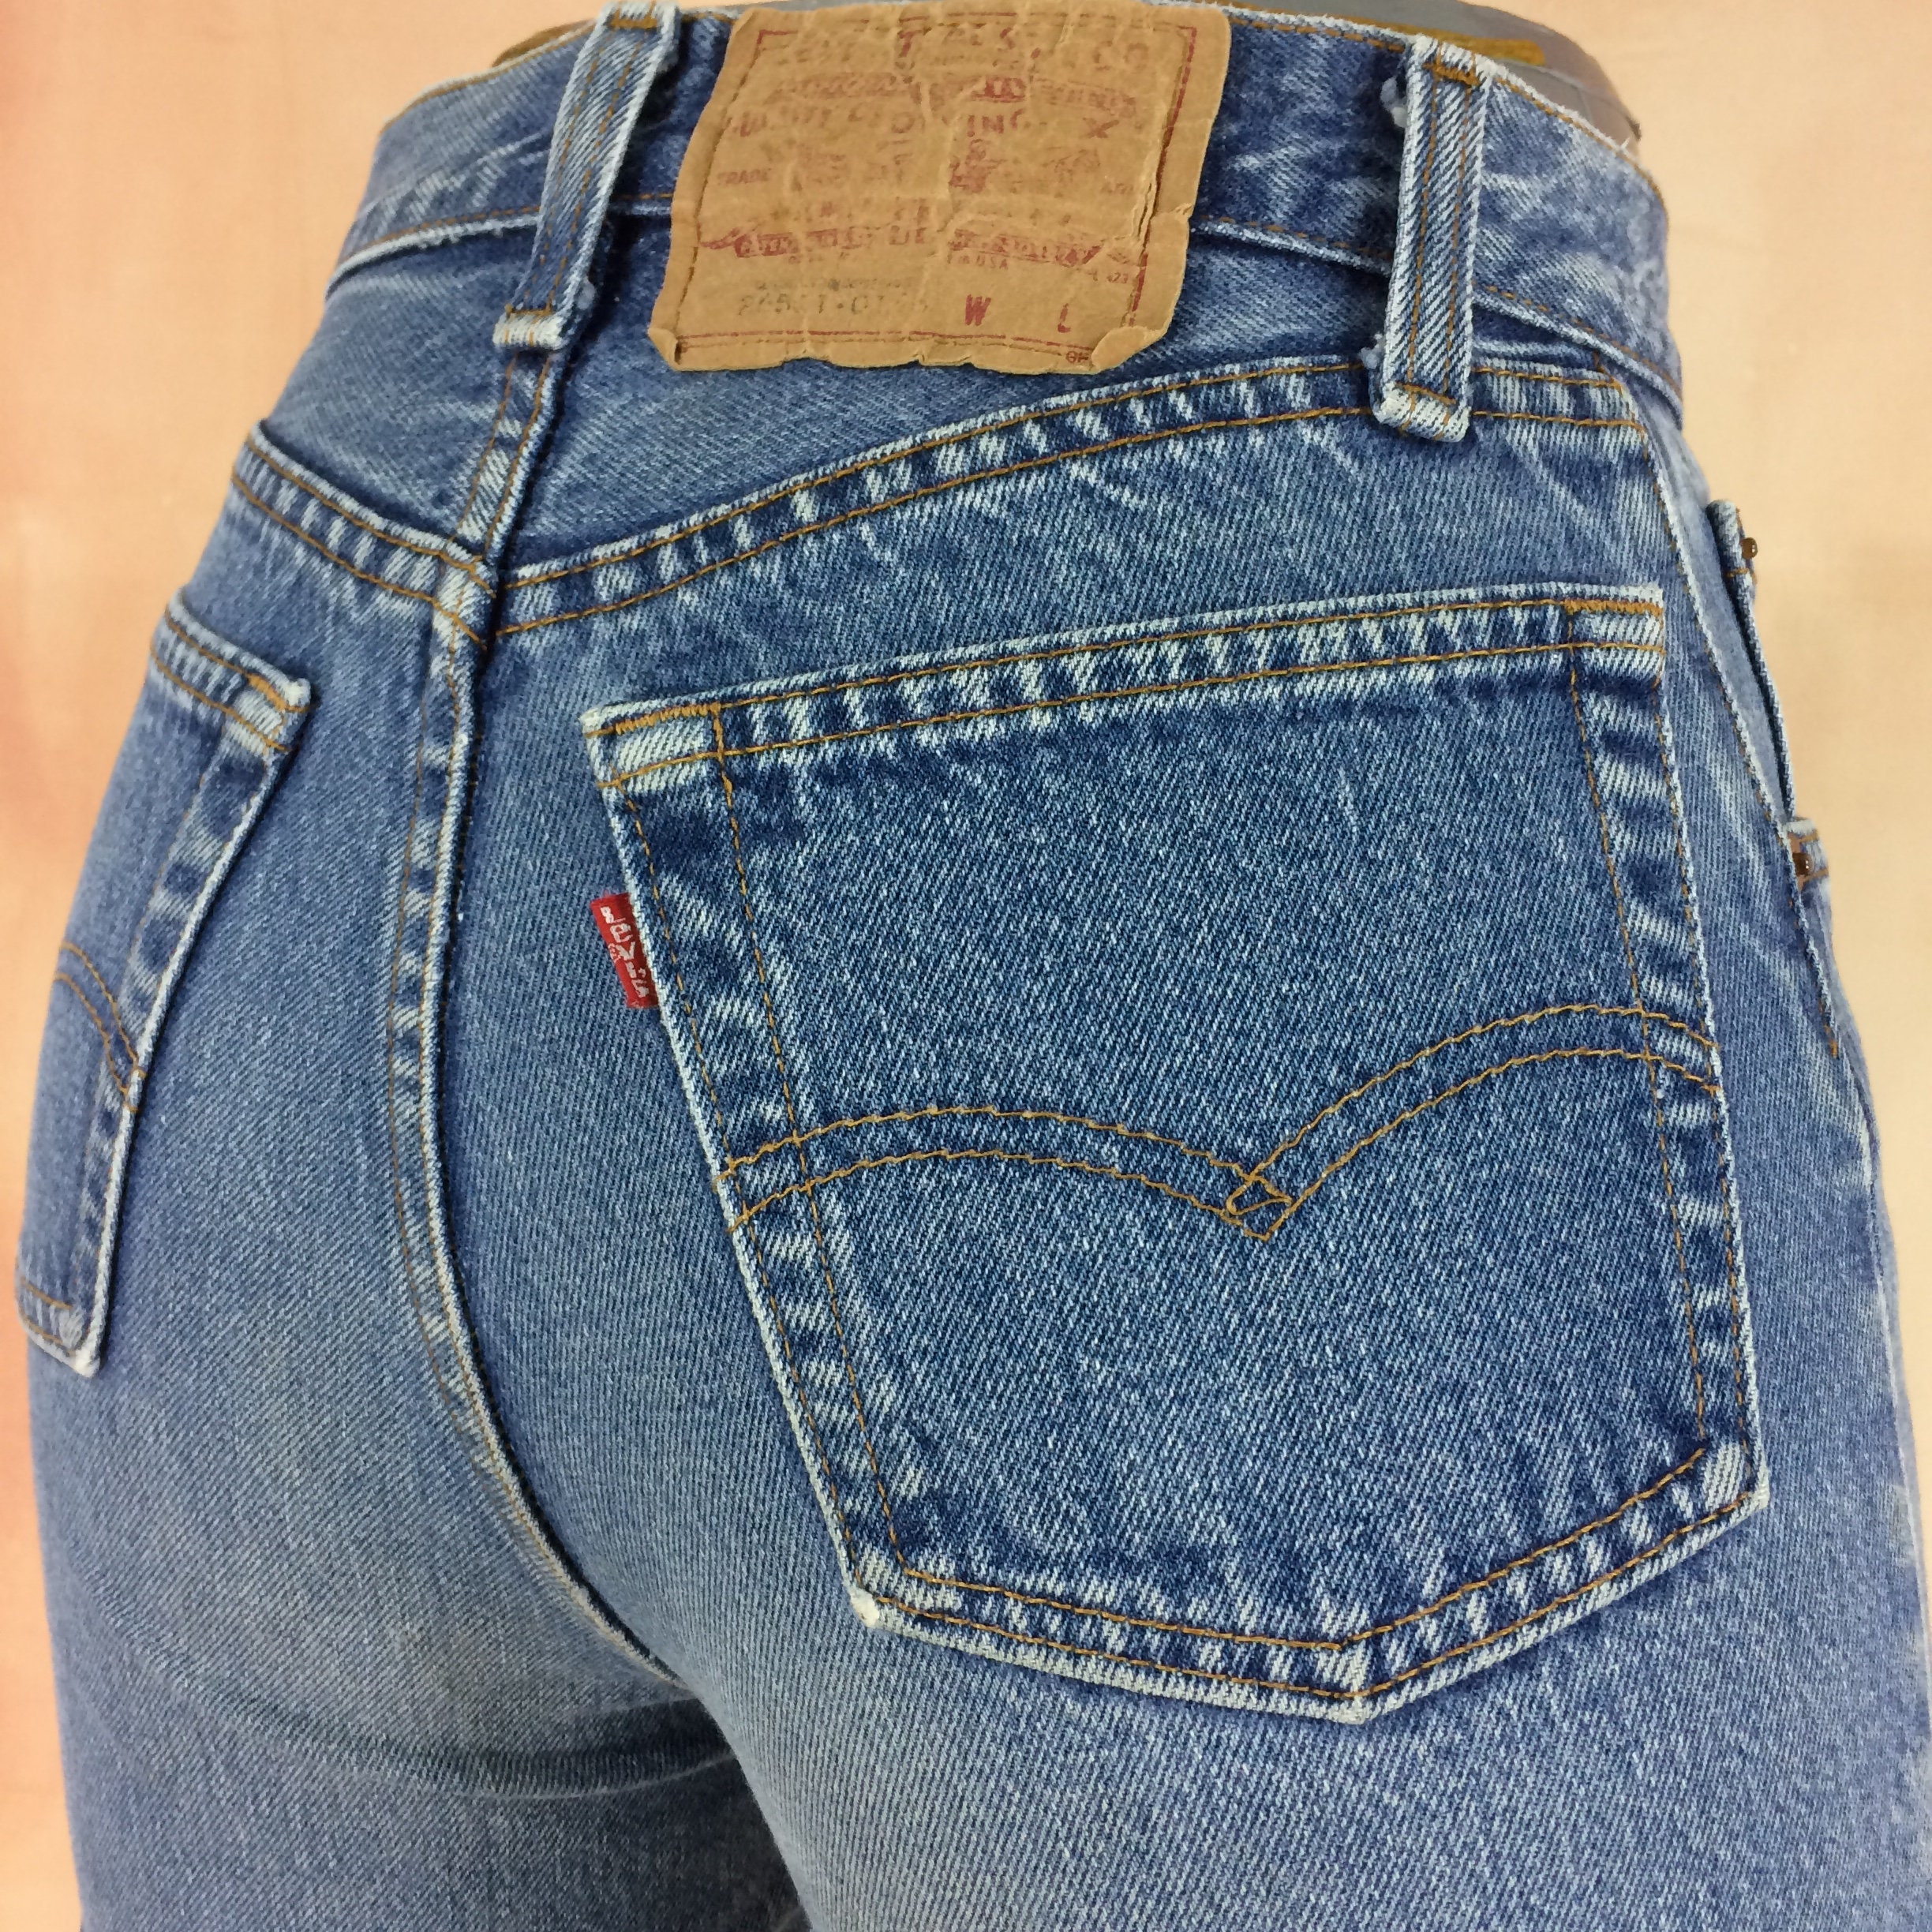 Buy Size 25 Levi's 501 Button Fly Jeans Vintage Distressed Online in India  - Etsy